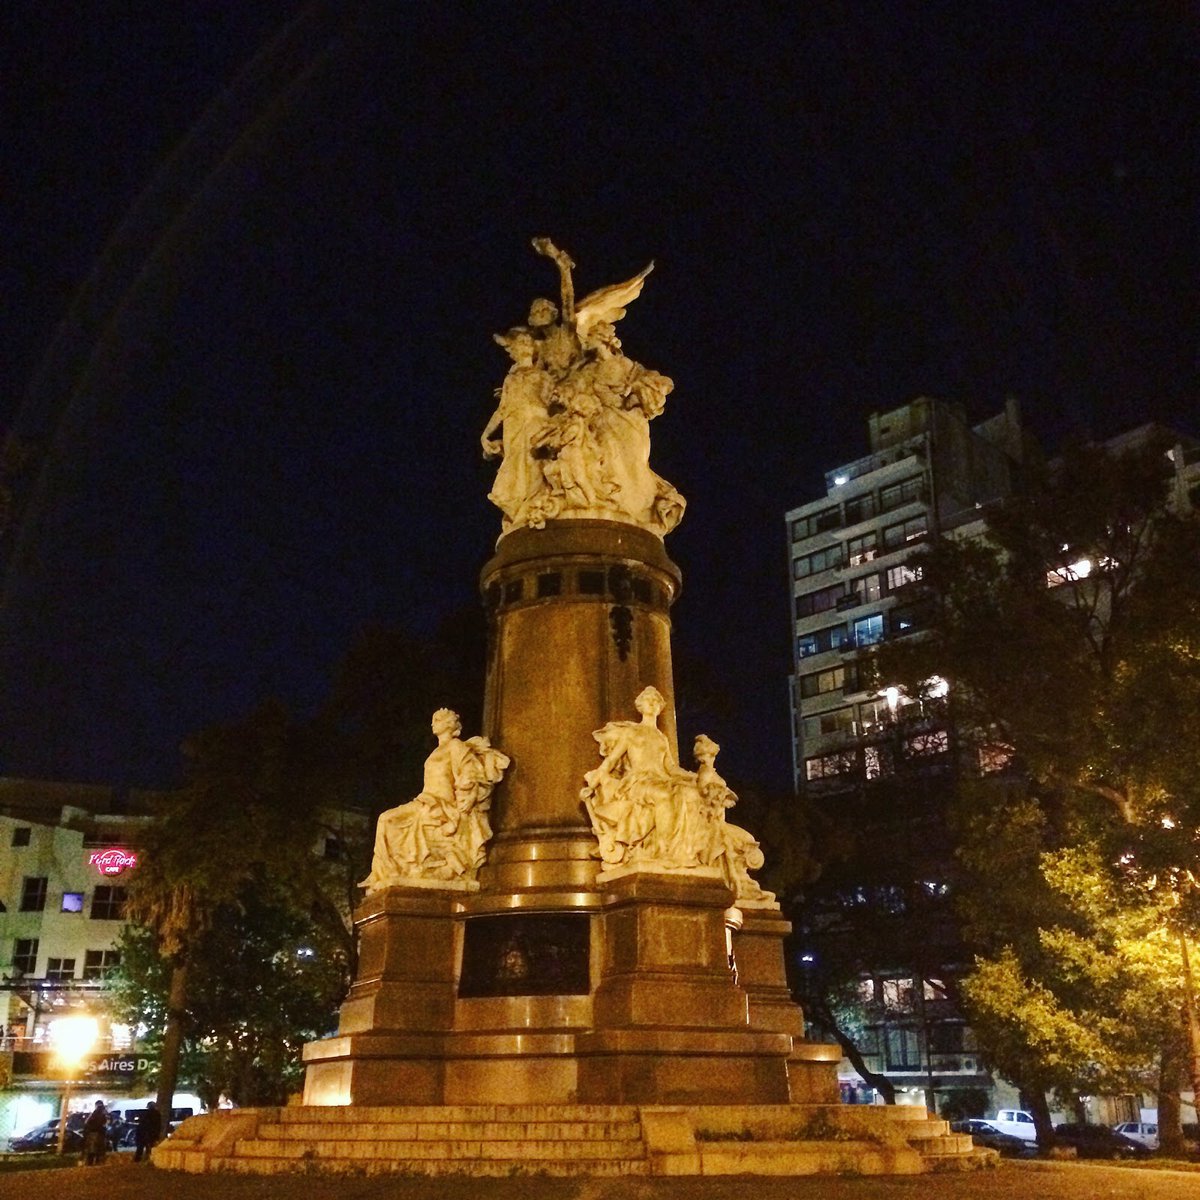 A picture of Plaza Francia